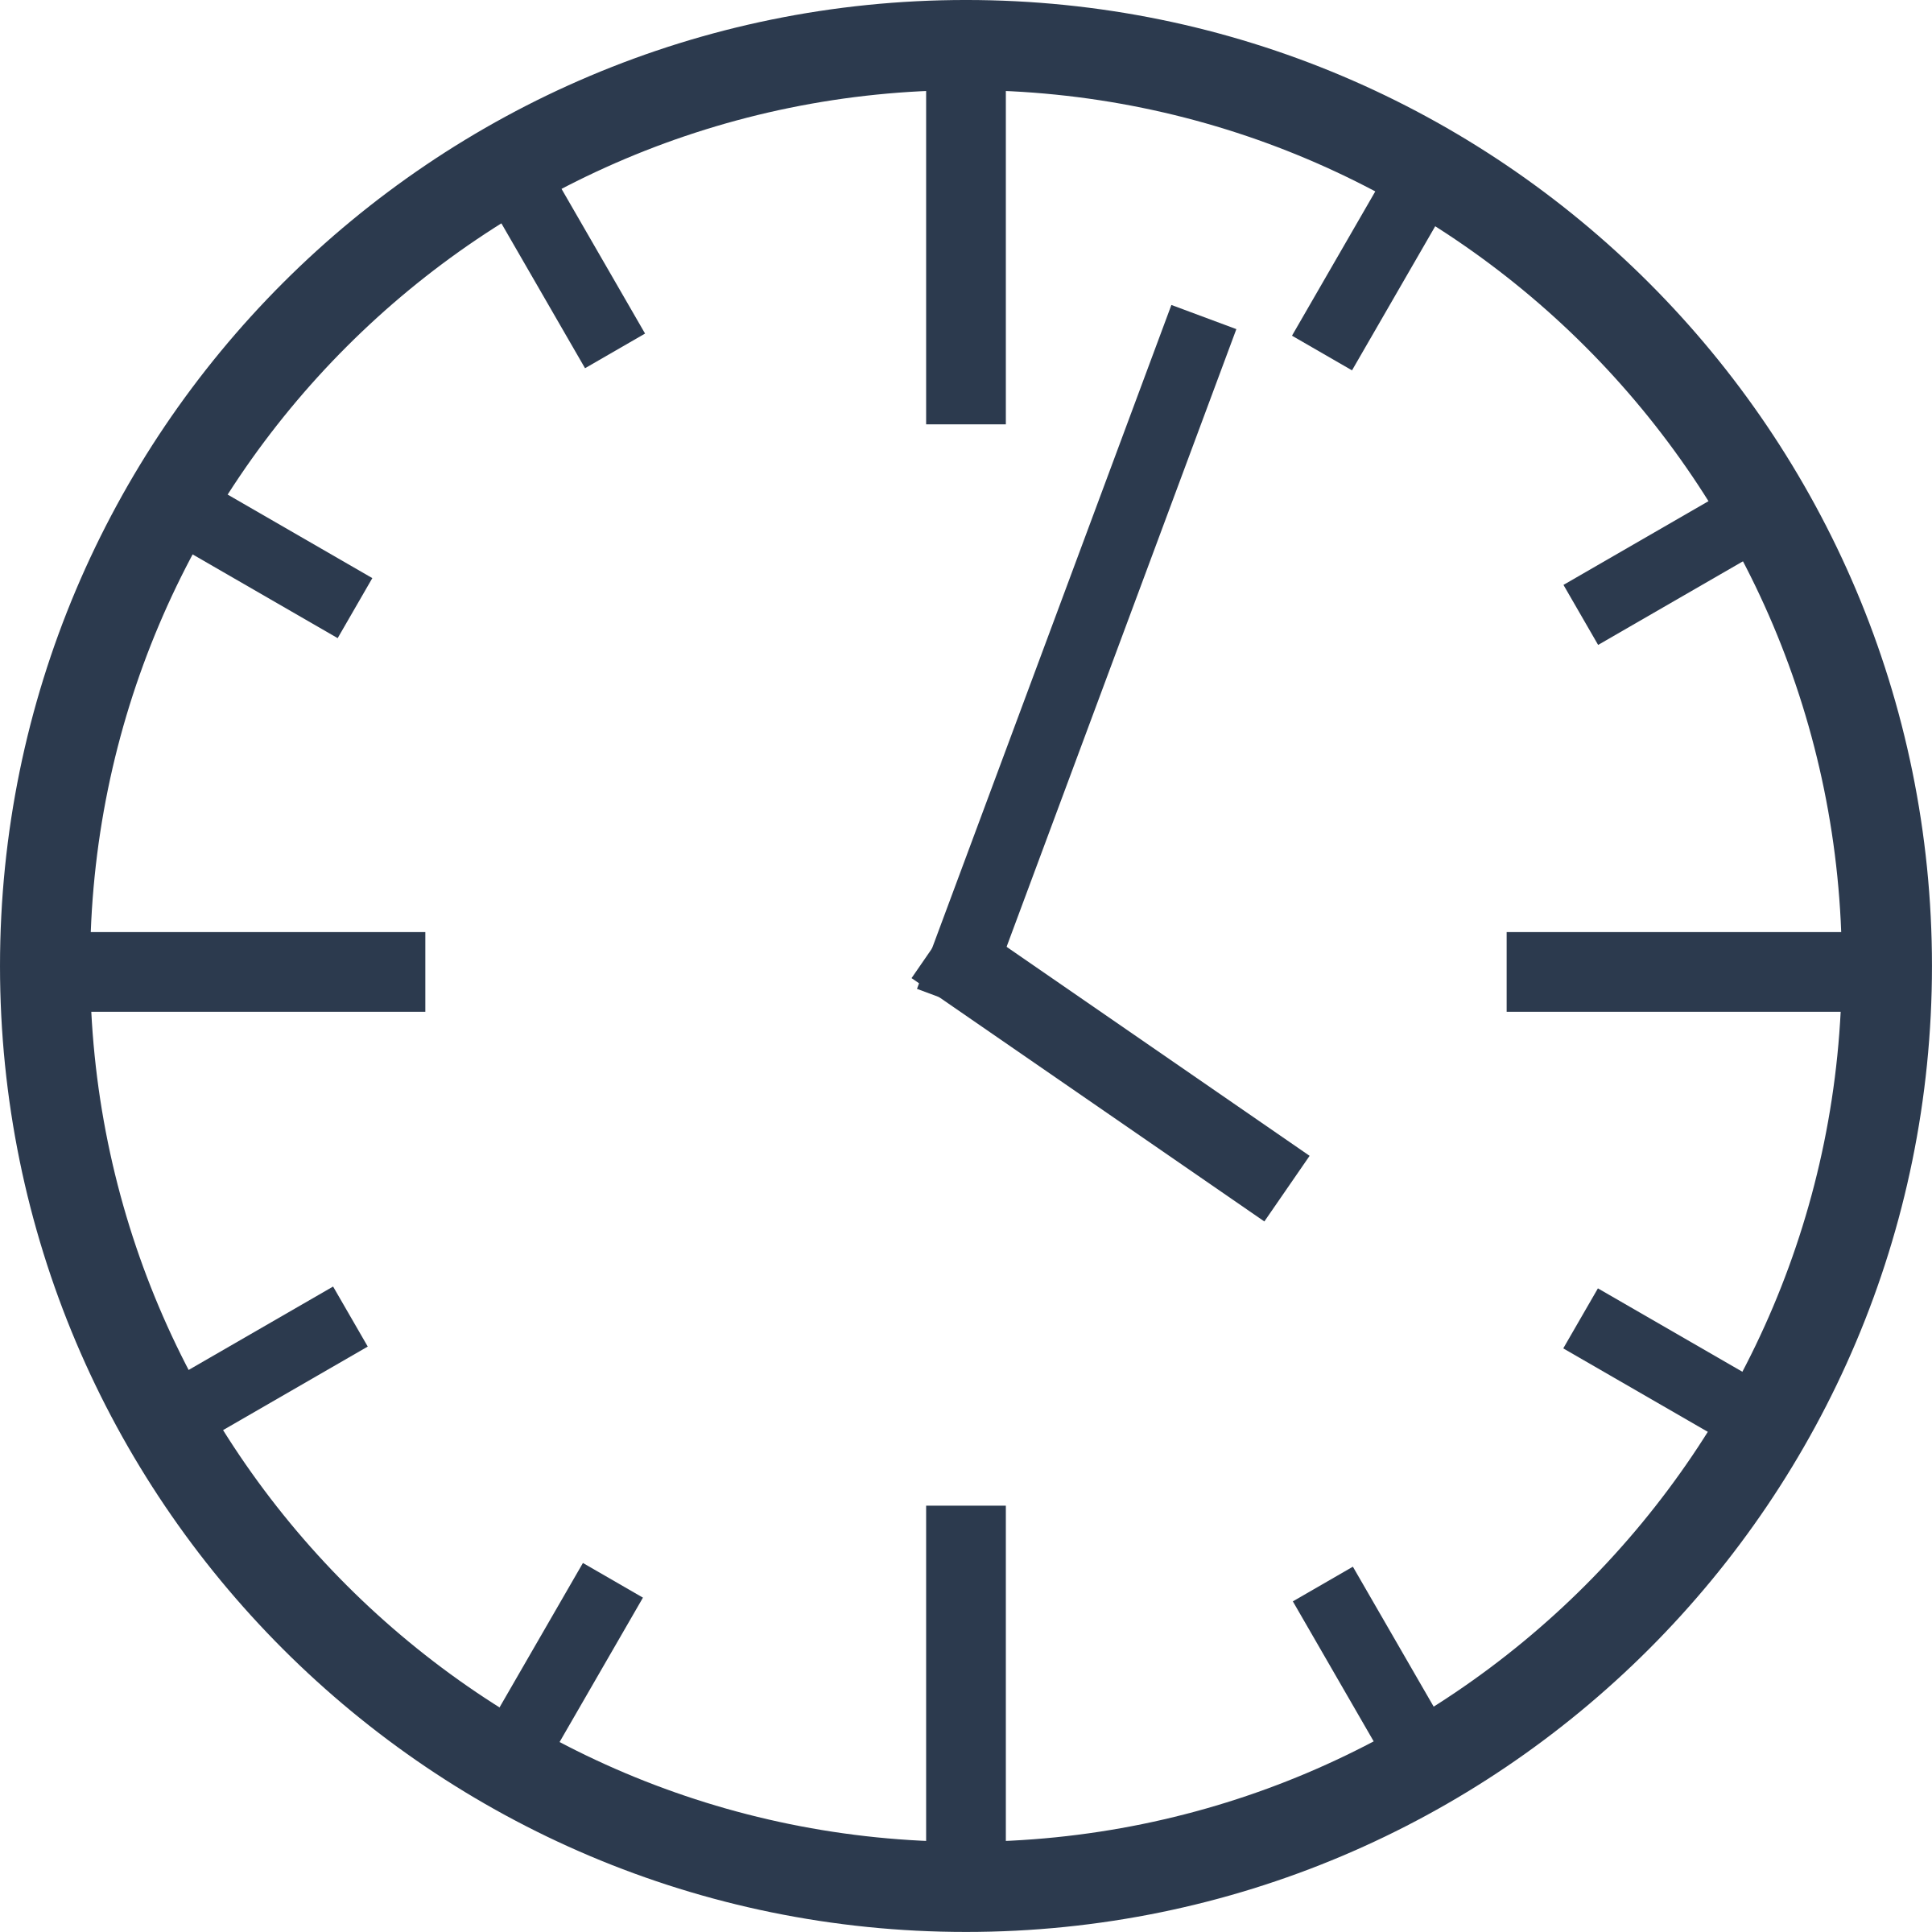 Clipart Of Clock Simple Clipartbarn - Clock .png (2400x2400)